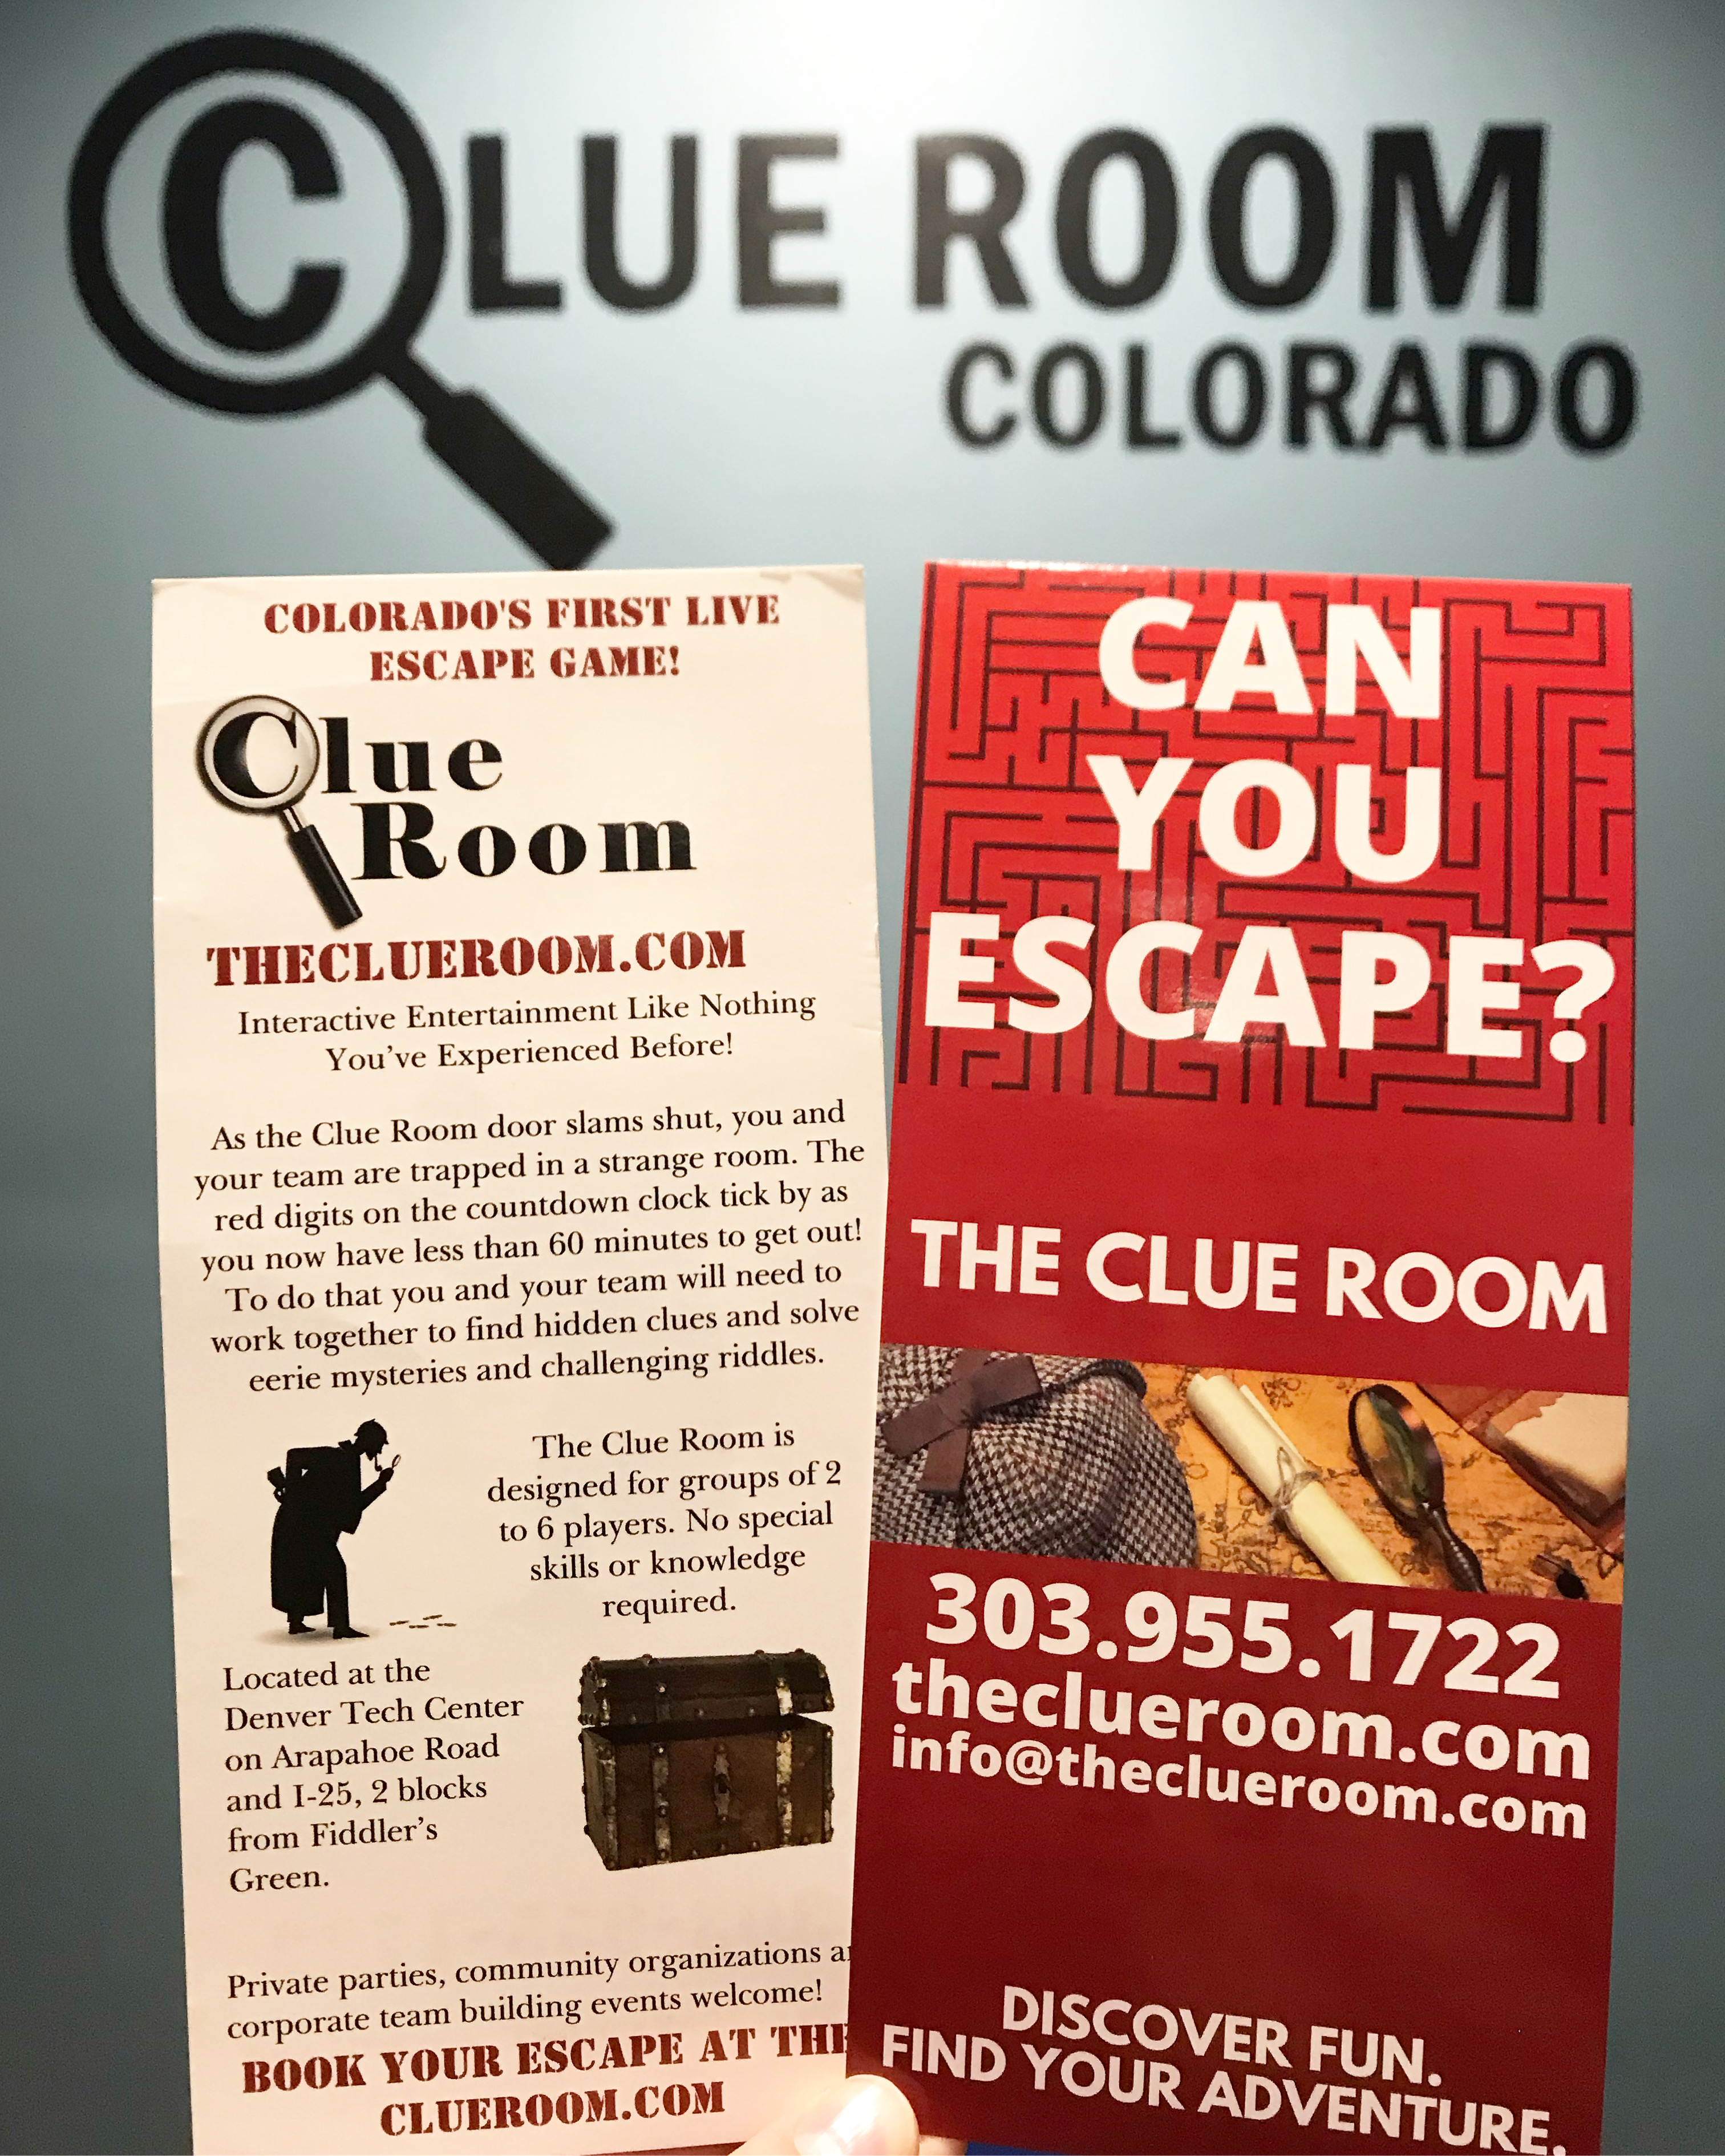 The Clue Room Colorado's First and Largest Escape Game Company